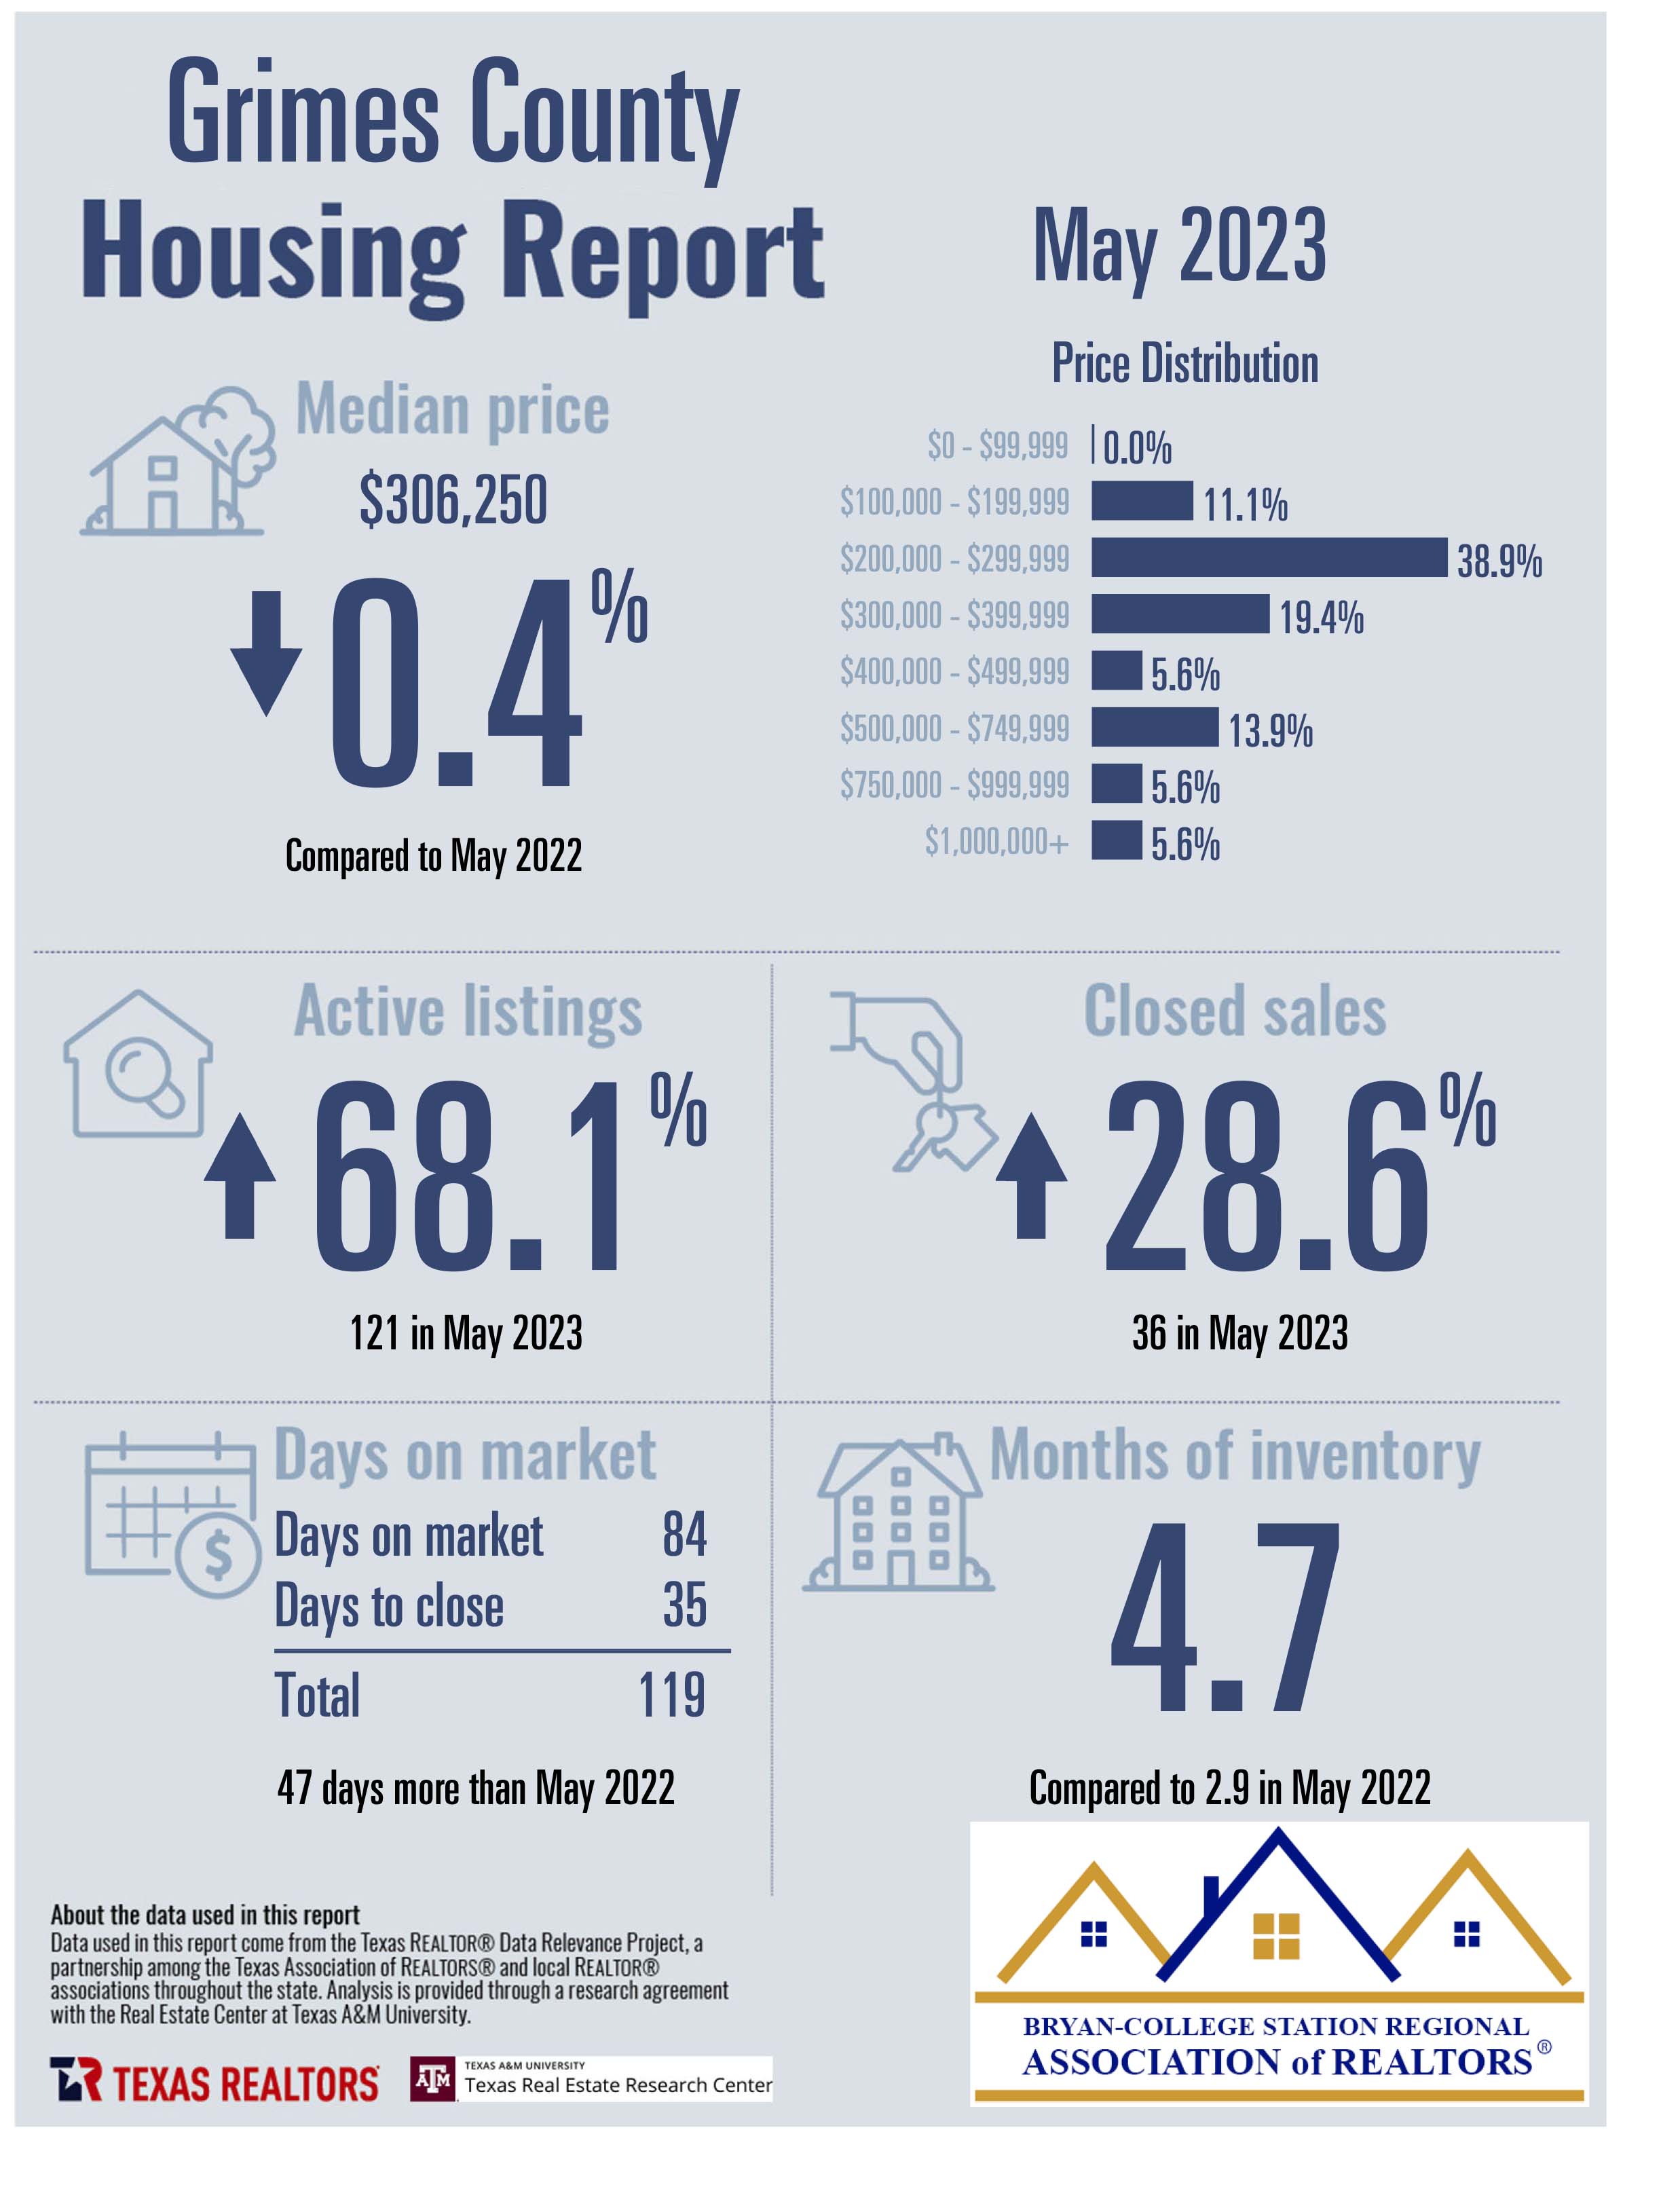 Residential Home Sale Report may 2023 - Grimes